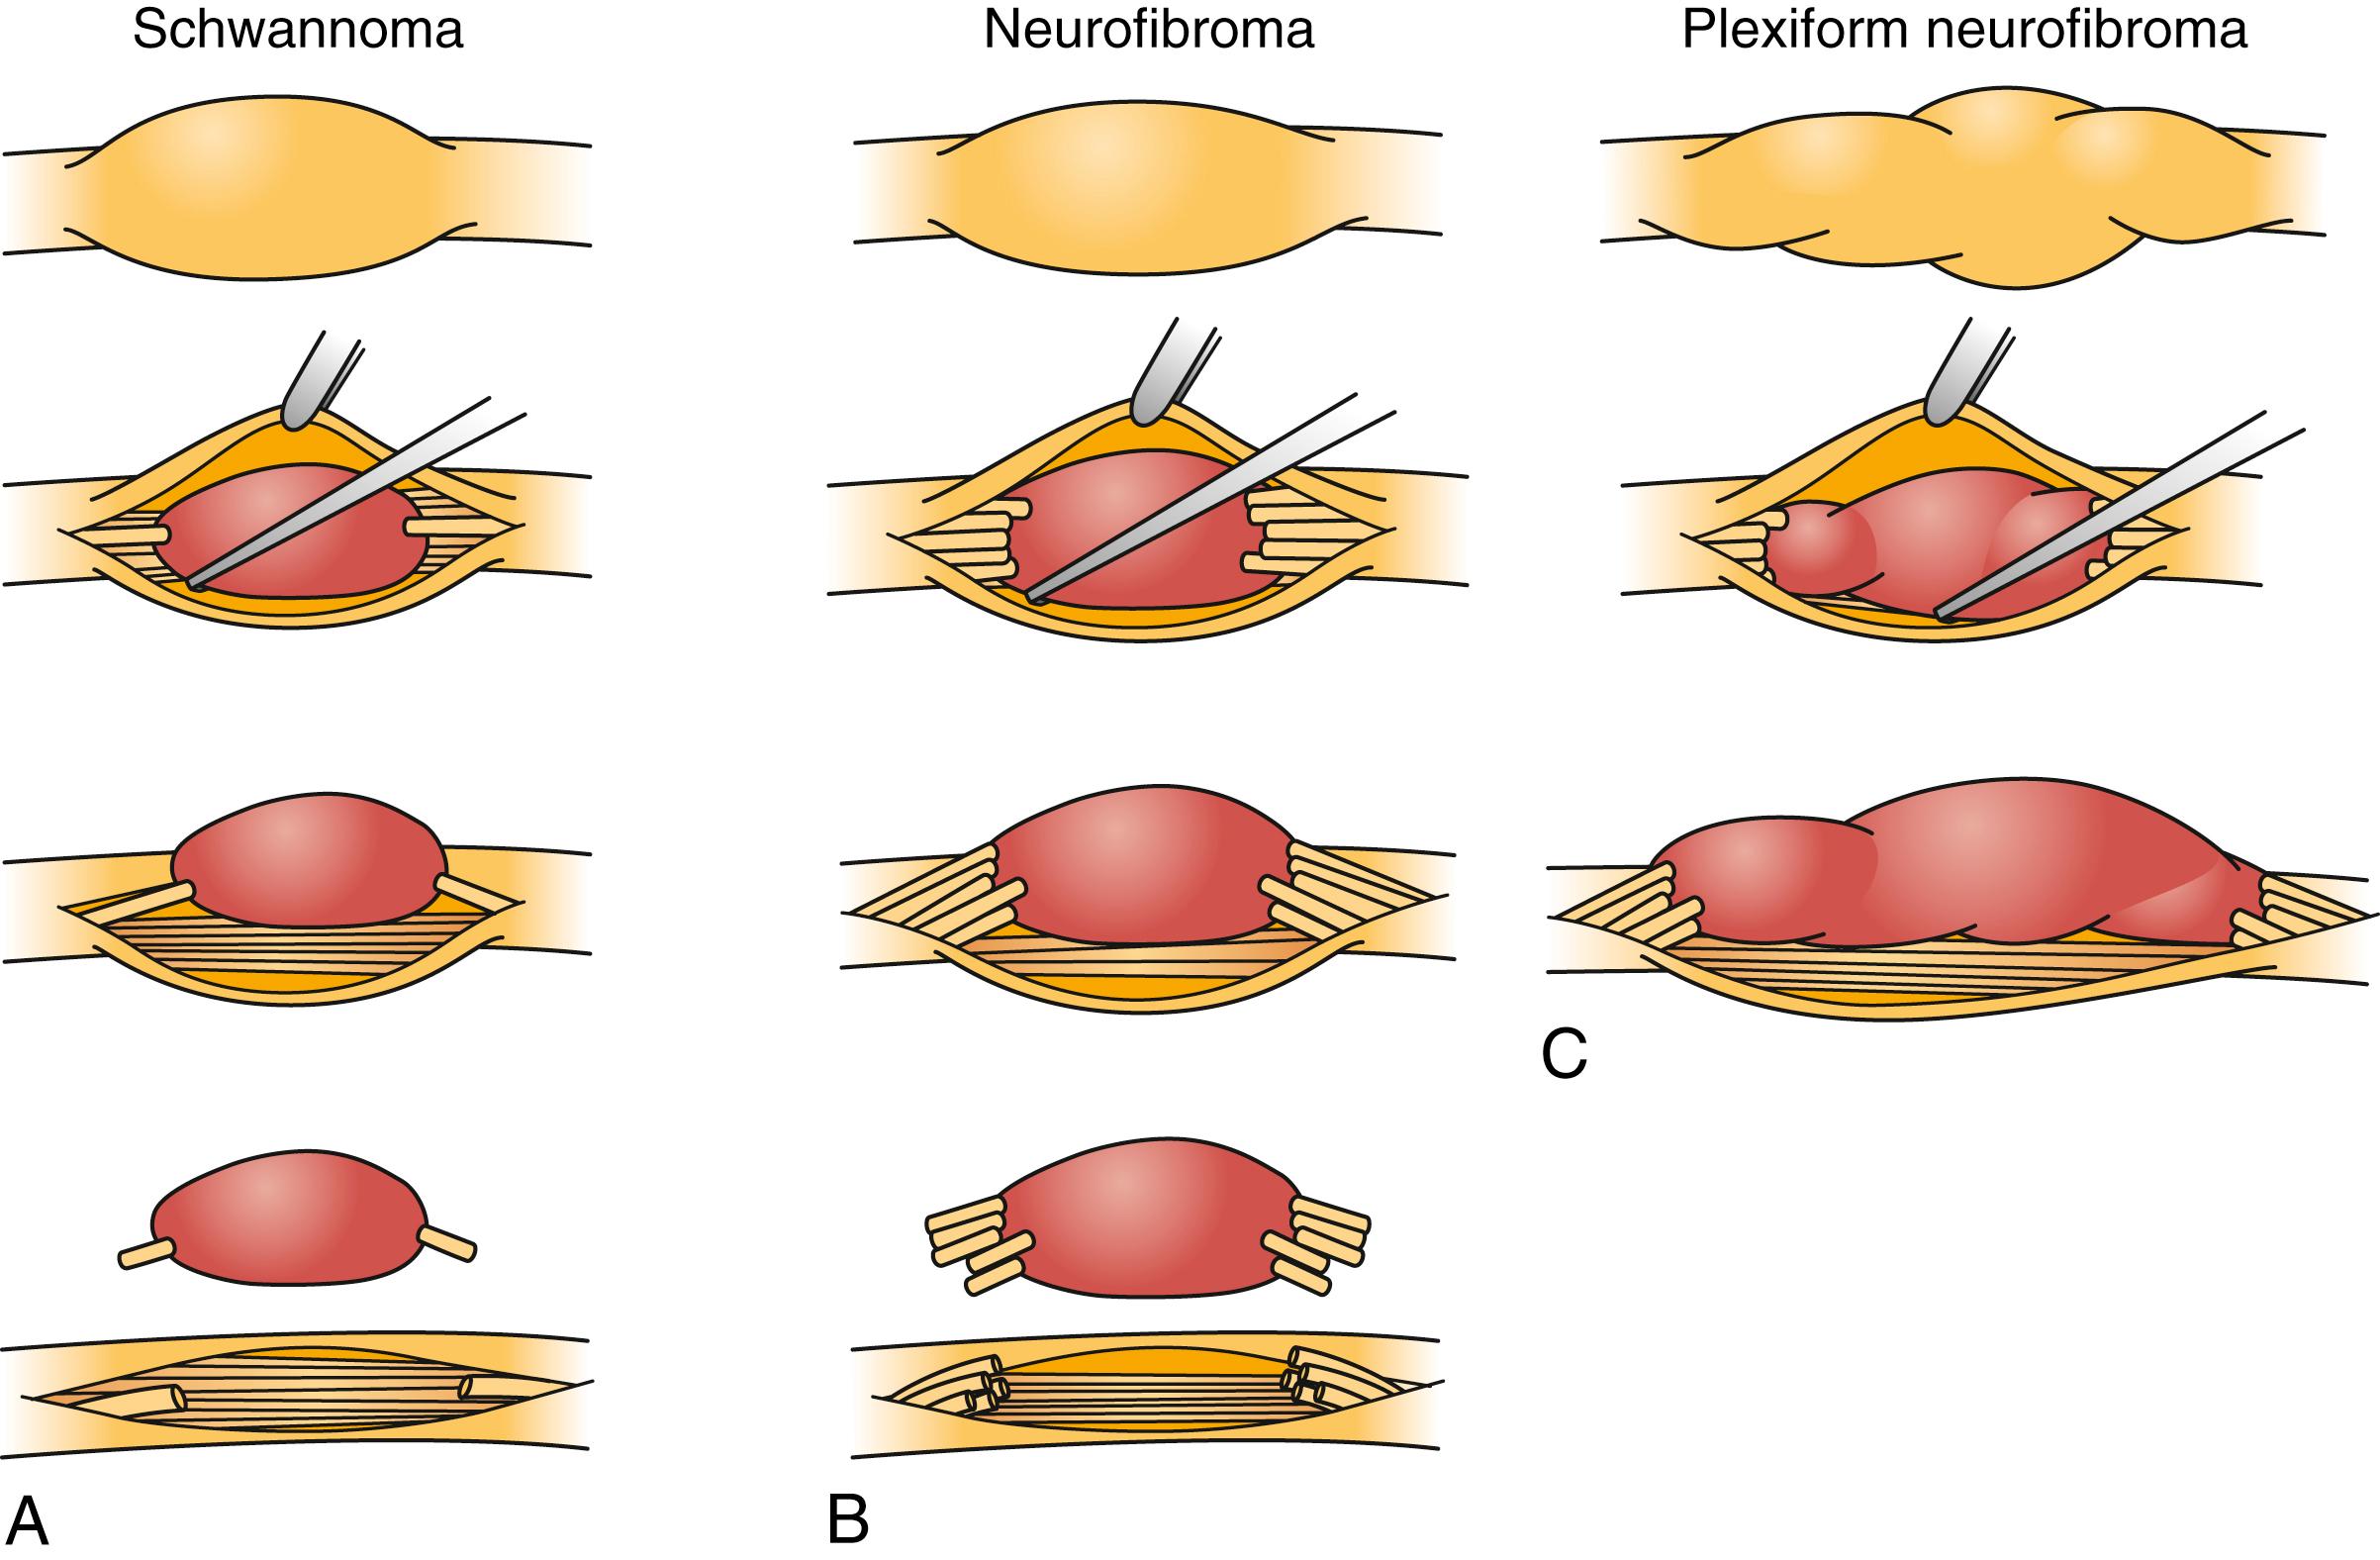 Fig. 190.5, Schematic illustration of surgery for benign peripheral nerve sheath tumors. (A) Schwannoma resection. The tumor causes well-circumscribed dilatation of the nerve. Internal neurolysis shows that the tumor has thinned and displaced the fascicles. A single small fascicle may be enveloped by tumor. The fascicles surrounding the schwannoma are dissected free, the tumor capsule is opened, and the schwannoma and any enveloped fascicles are resected en bloc. (B) Neurofibroma resection. Neurofibromas cause well-circumscribed nerve dilatation (similar to schwannomas). However, unlike schwannomas, neurofibromas envelop, rather than displace, the majority of fascicles. After internal neurolysis, the tumor is seen enveloping multiple nerve fascicles. The neurofibroma and enveloped fascicles are resected en bloc. Nerve grafts may be required to repair functional fascicles that were resected. (C) Plexiform neurofibroma debulking. The plexiform neurofibroma has caused fusiform dilatation of the affected nerve. Intraneurally, the tumor has enveloped many fascicles. The tumor is debulked, but it cannot be fully resected.